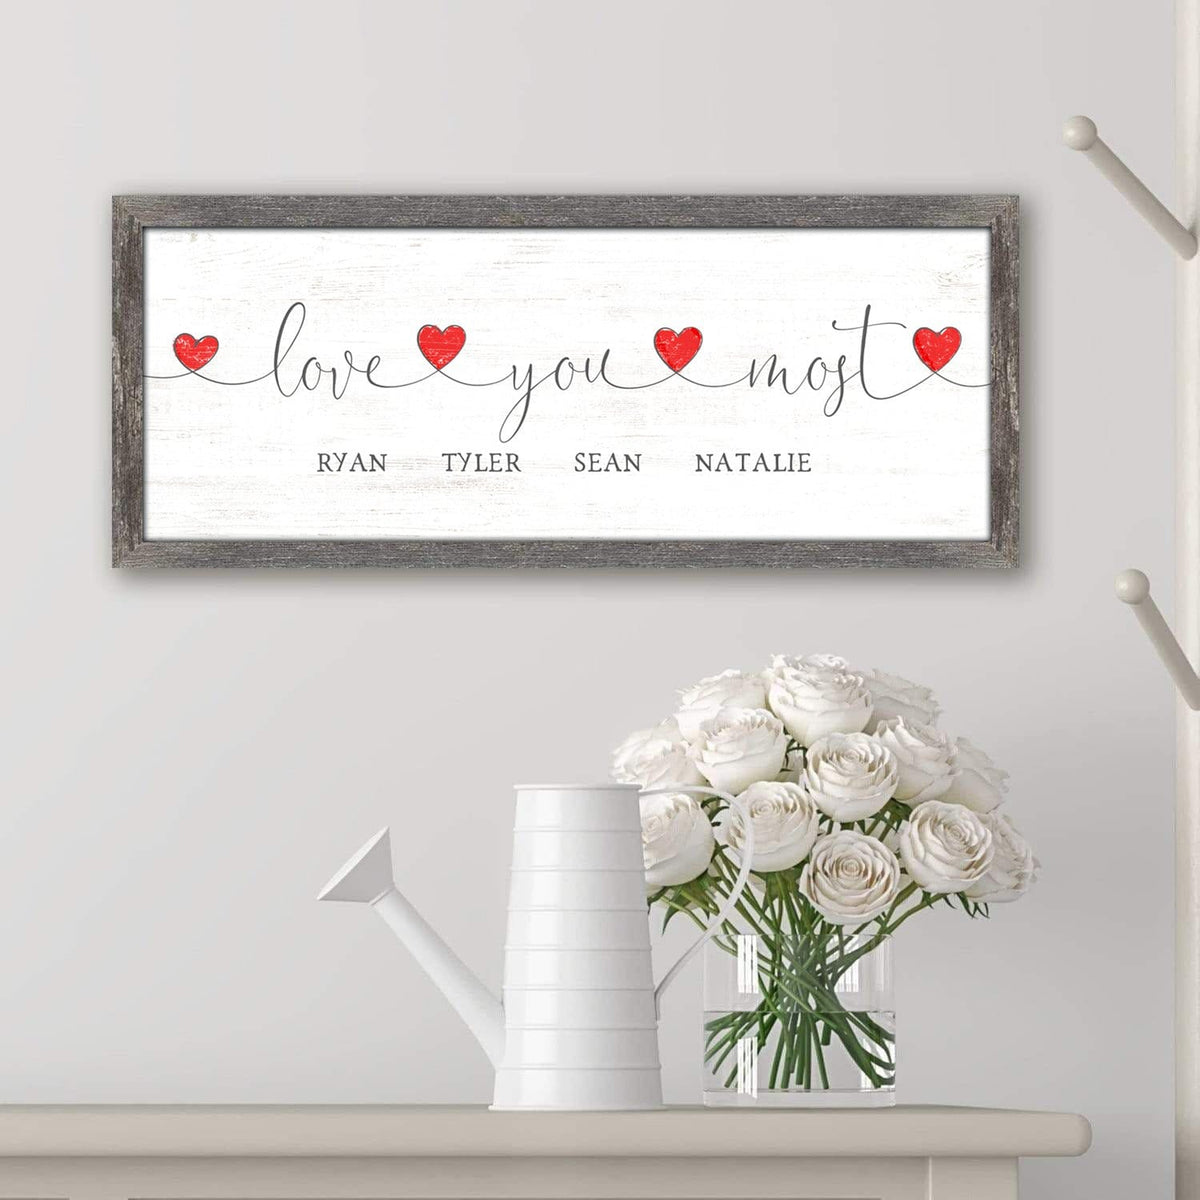 Love You most Romantic Personalized Gift from Personal Prints